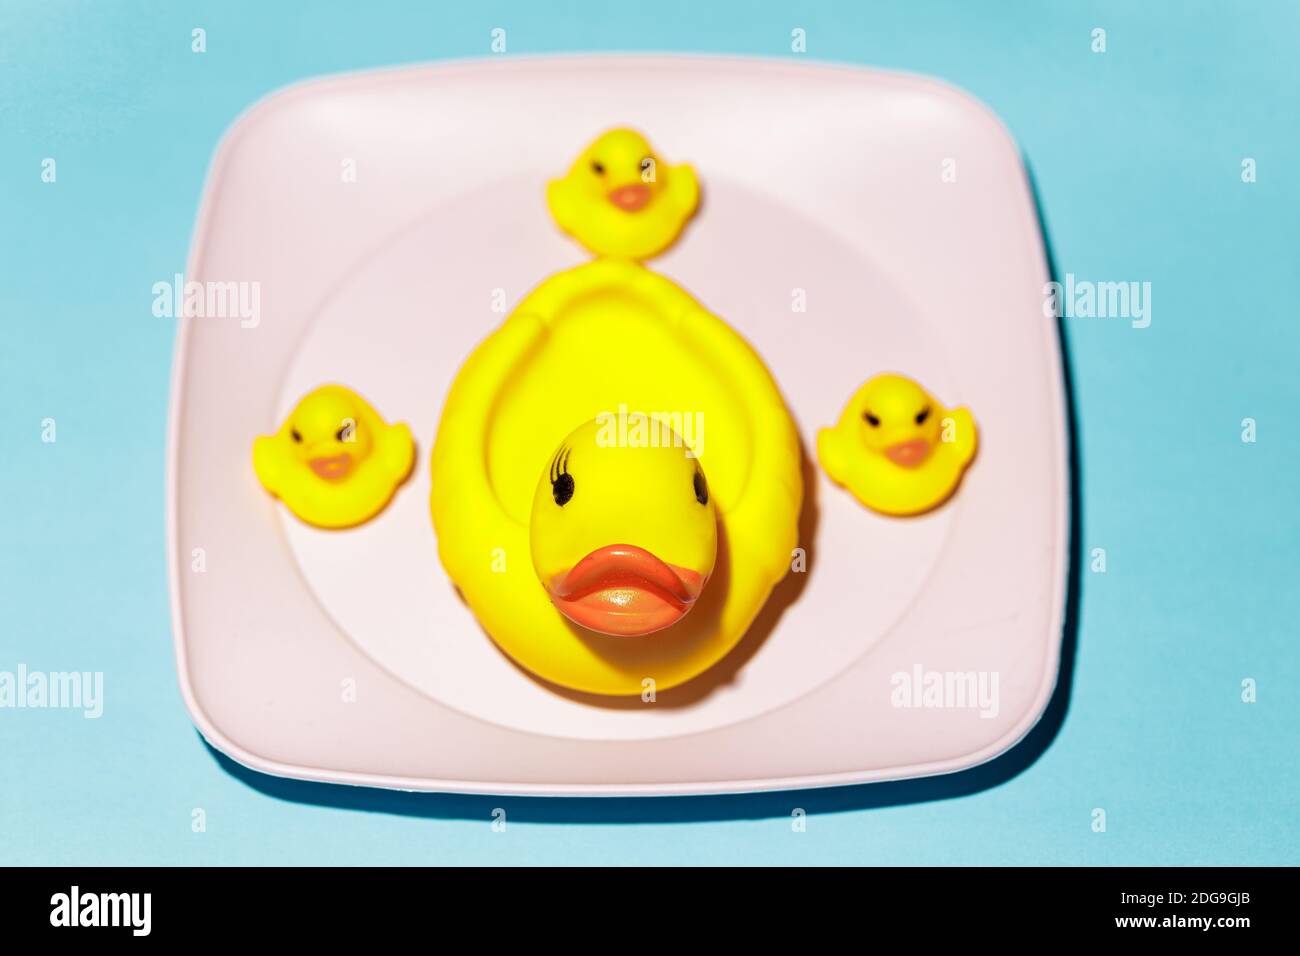 Yellow rubber ducks in a pink plastic plate on a blue background Stock Photo